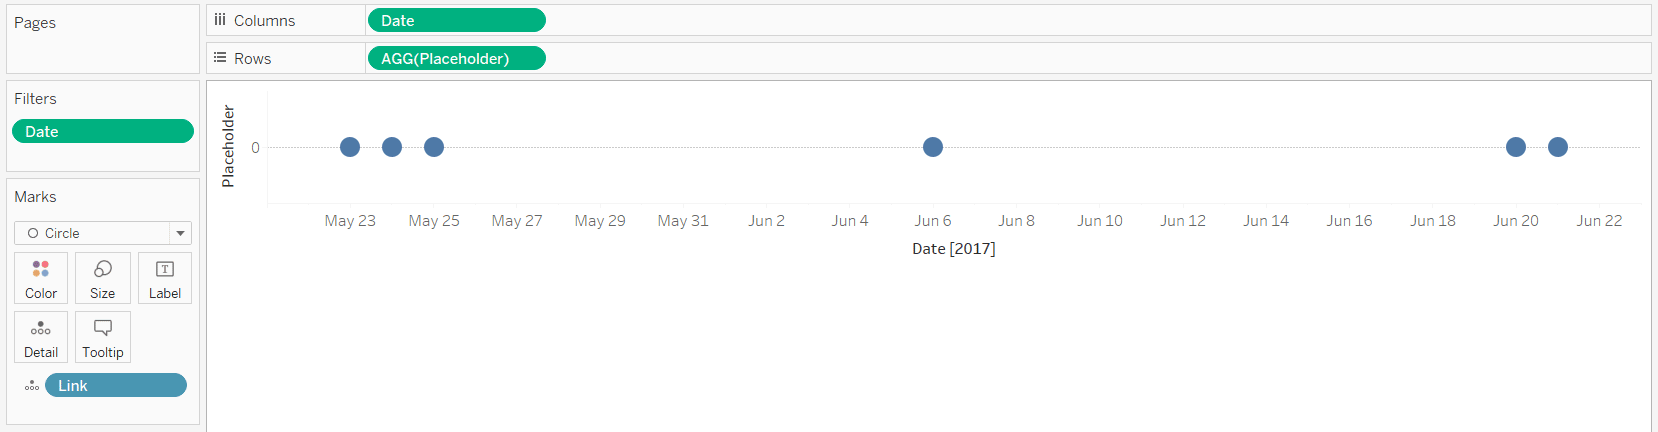 Tableau Timeline of Next 90 Days with Mark Type of Circle